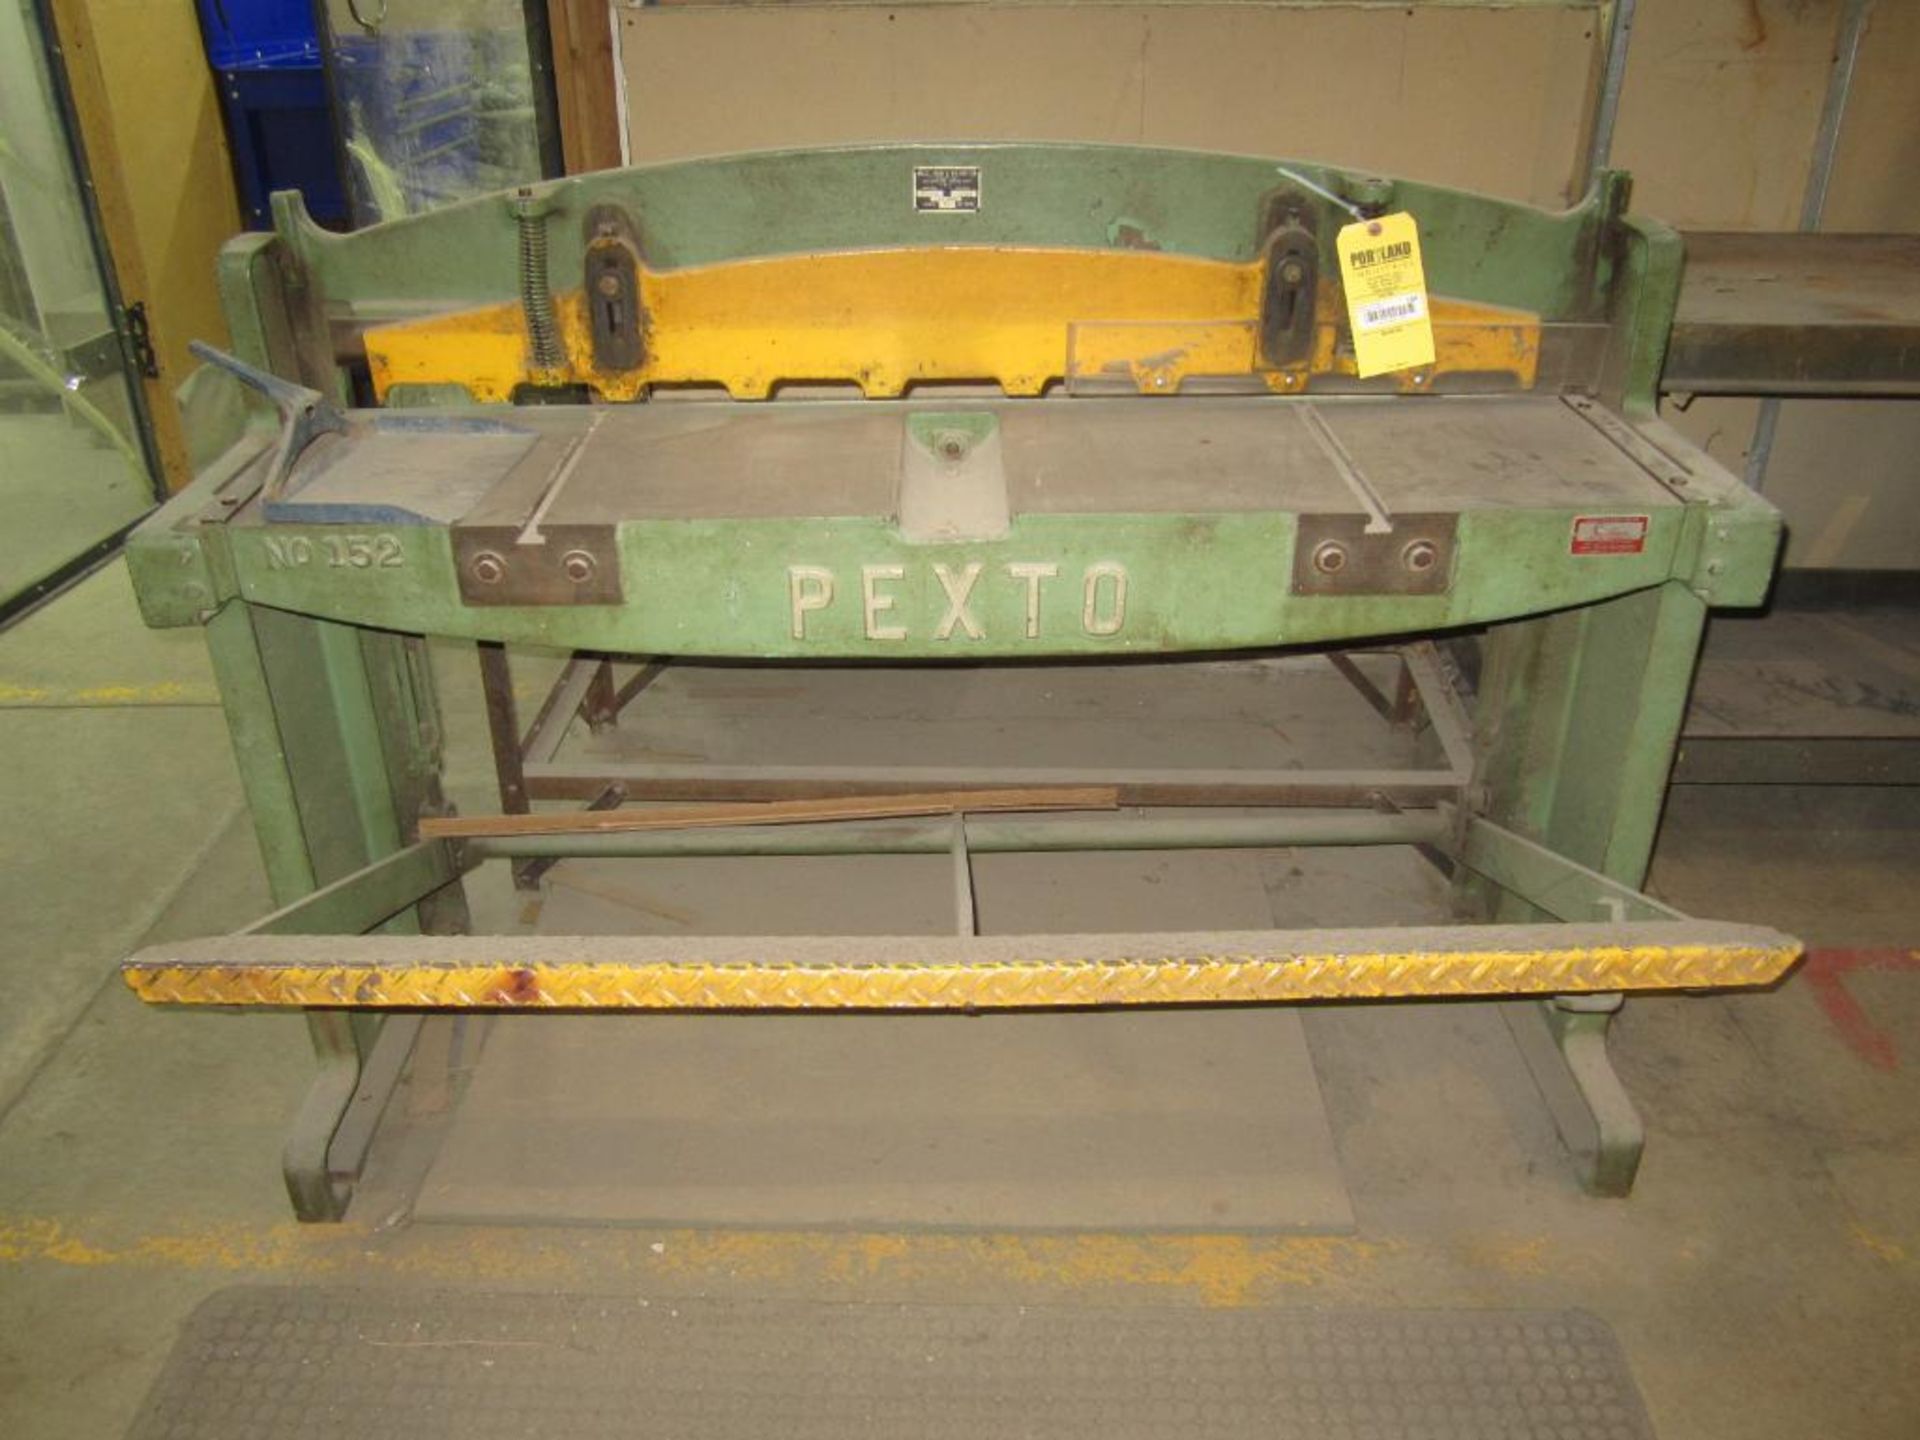 Pexto metal fast shear Peck, stow & wilcox - Image 2 of 4